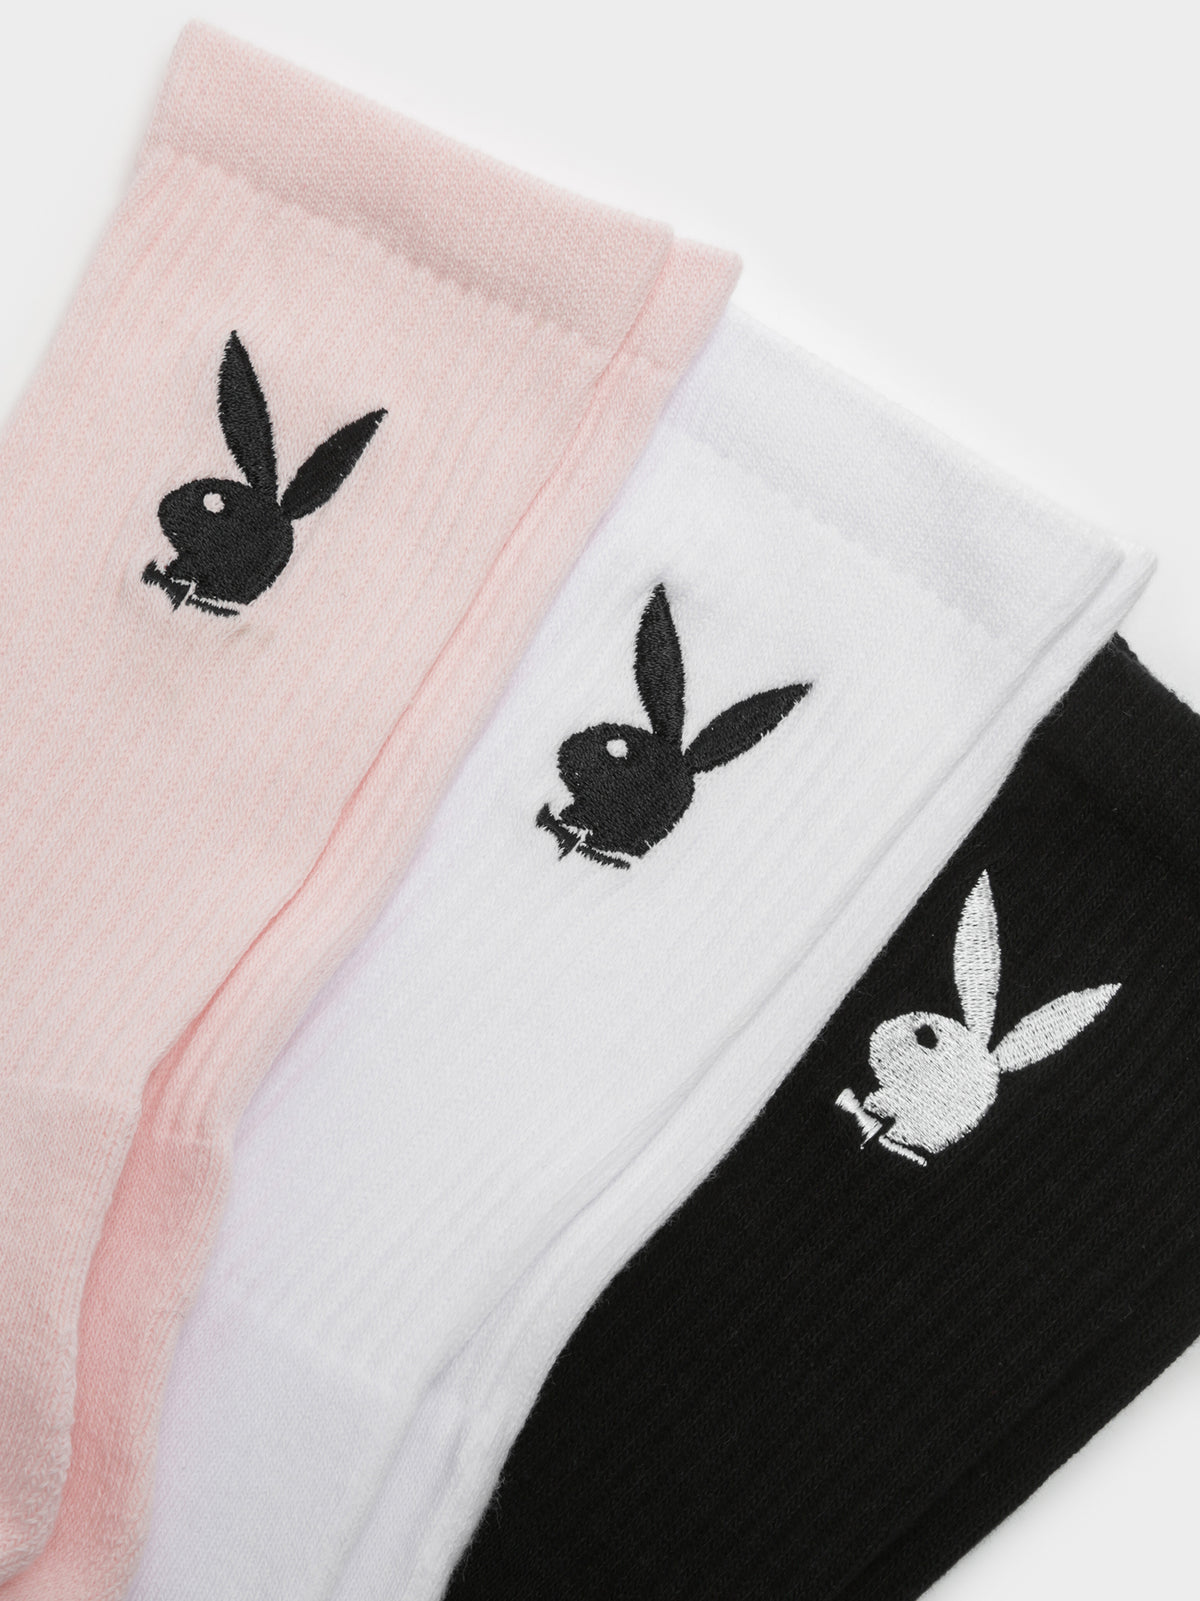 3 Pairs of Bunny Crew Socks in Black, White &amp; Pink